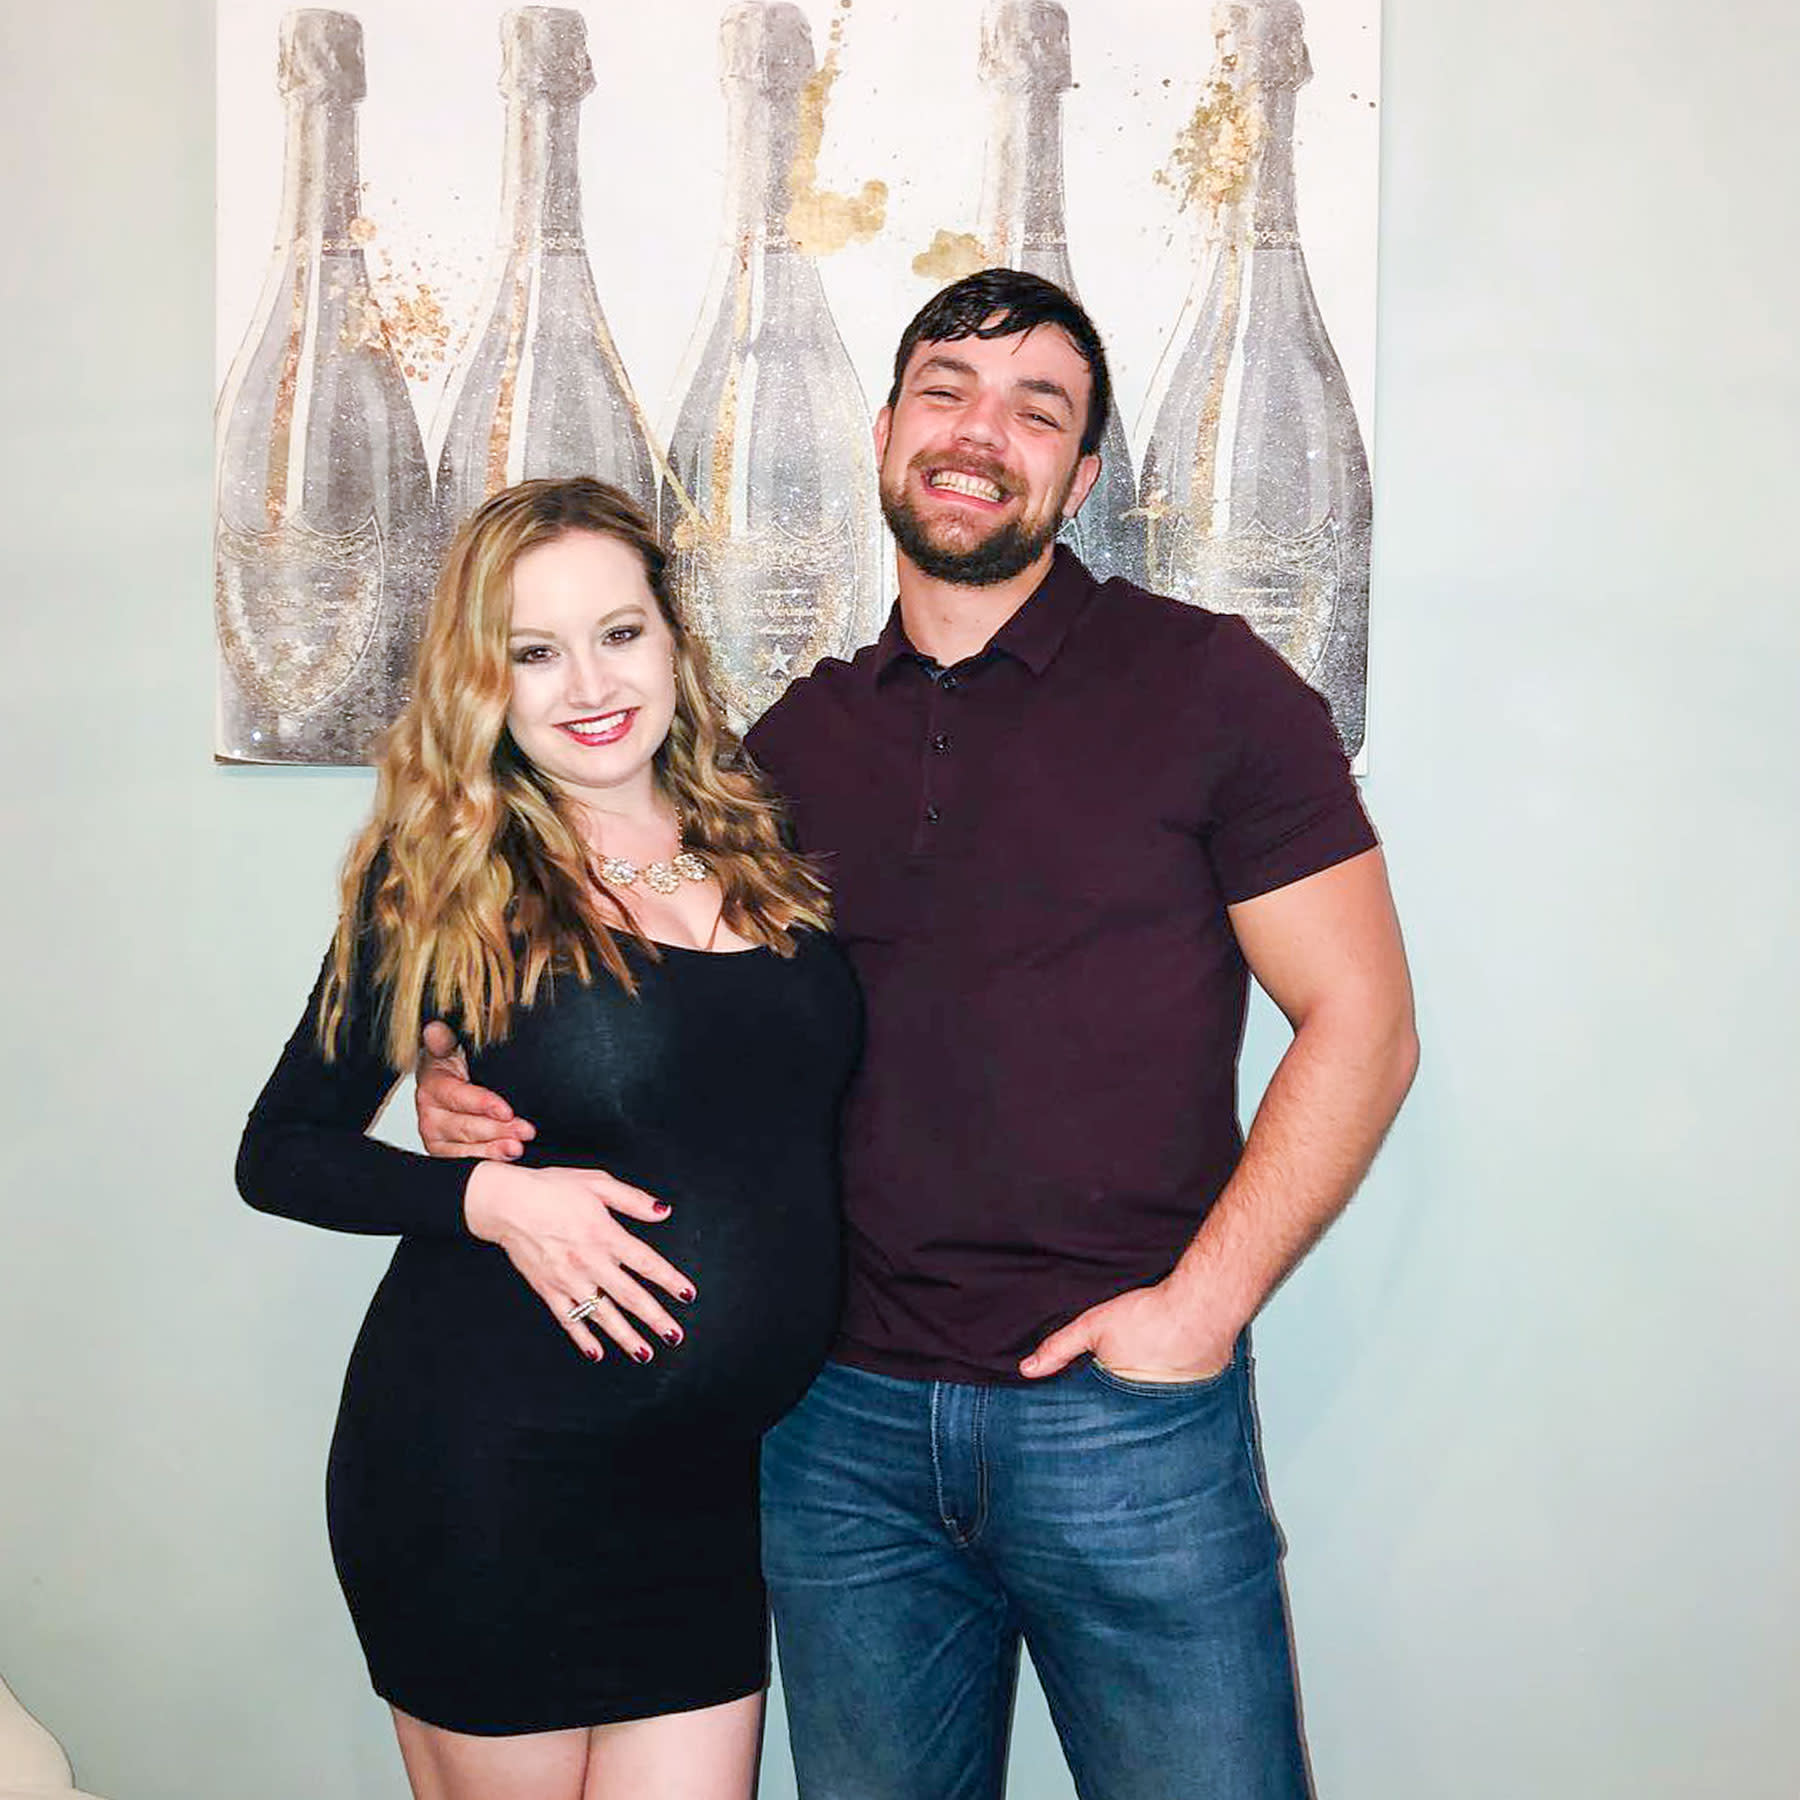 90 Day Fiancé Stars Elizabeth Potthast And Andrei Castravet Welcome Daughter Eleanor Louise 